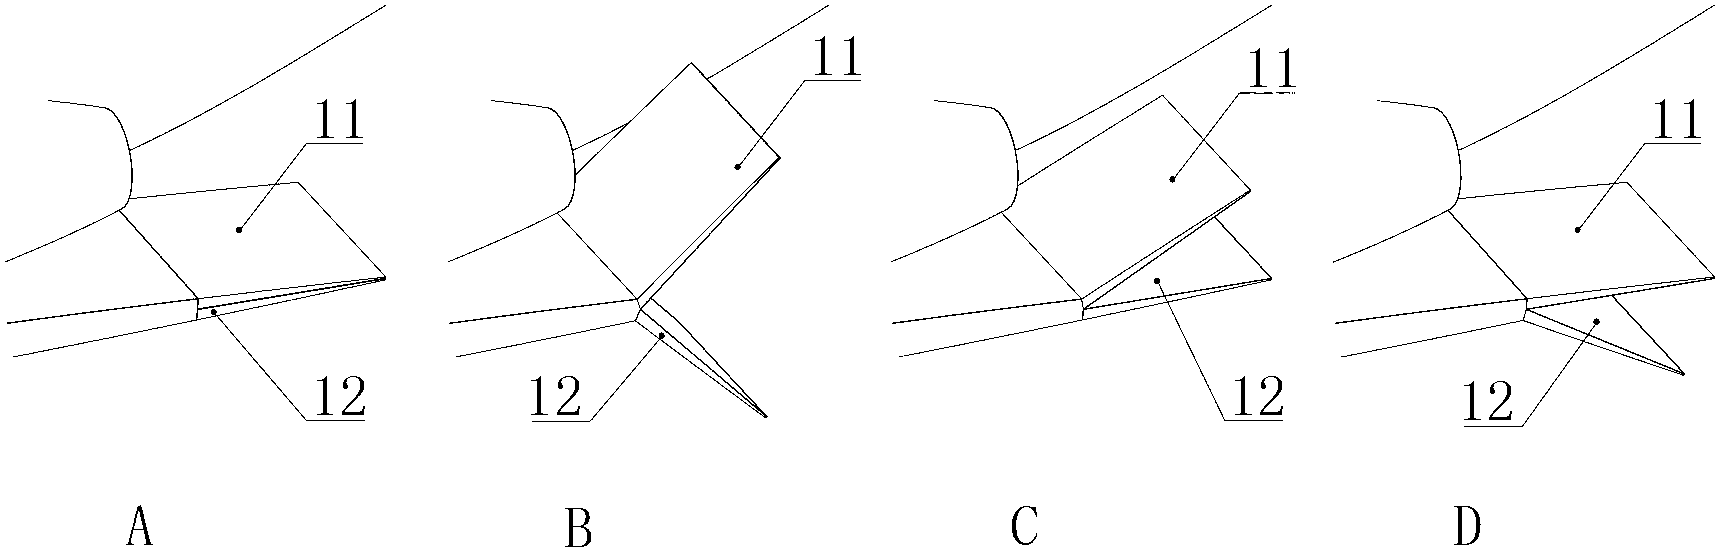 Corporate aircraft engine upper placement and front swept wing duck type layout